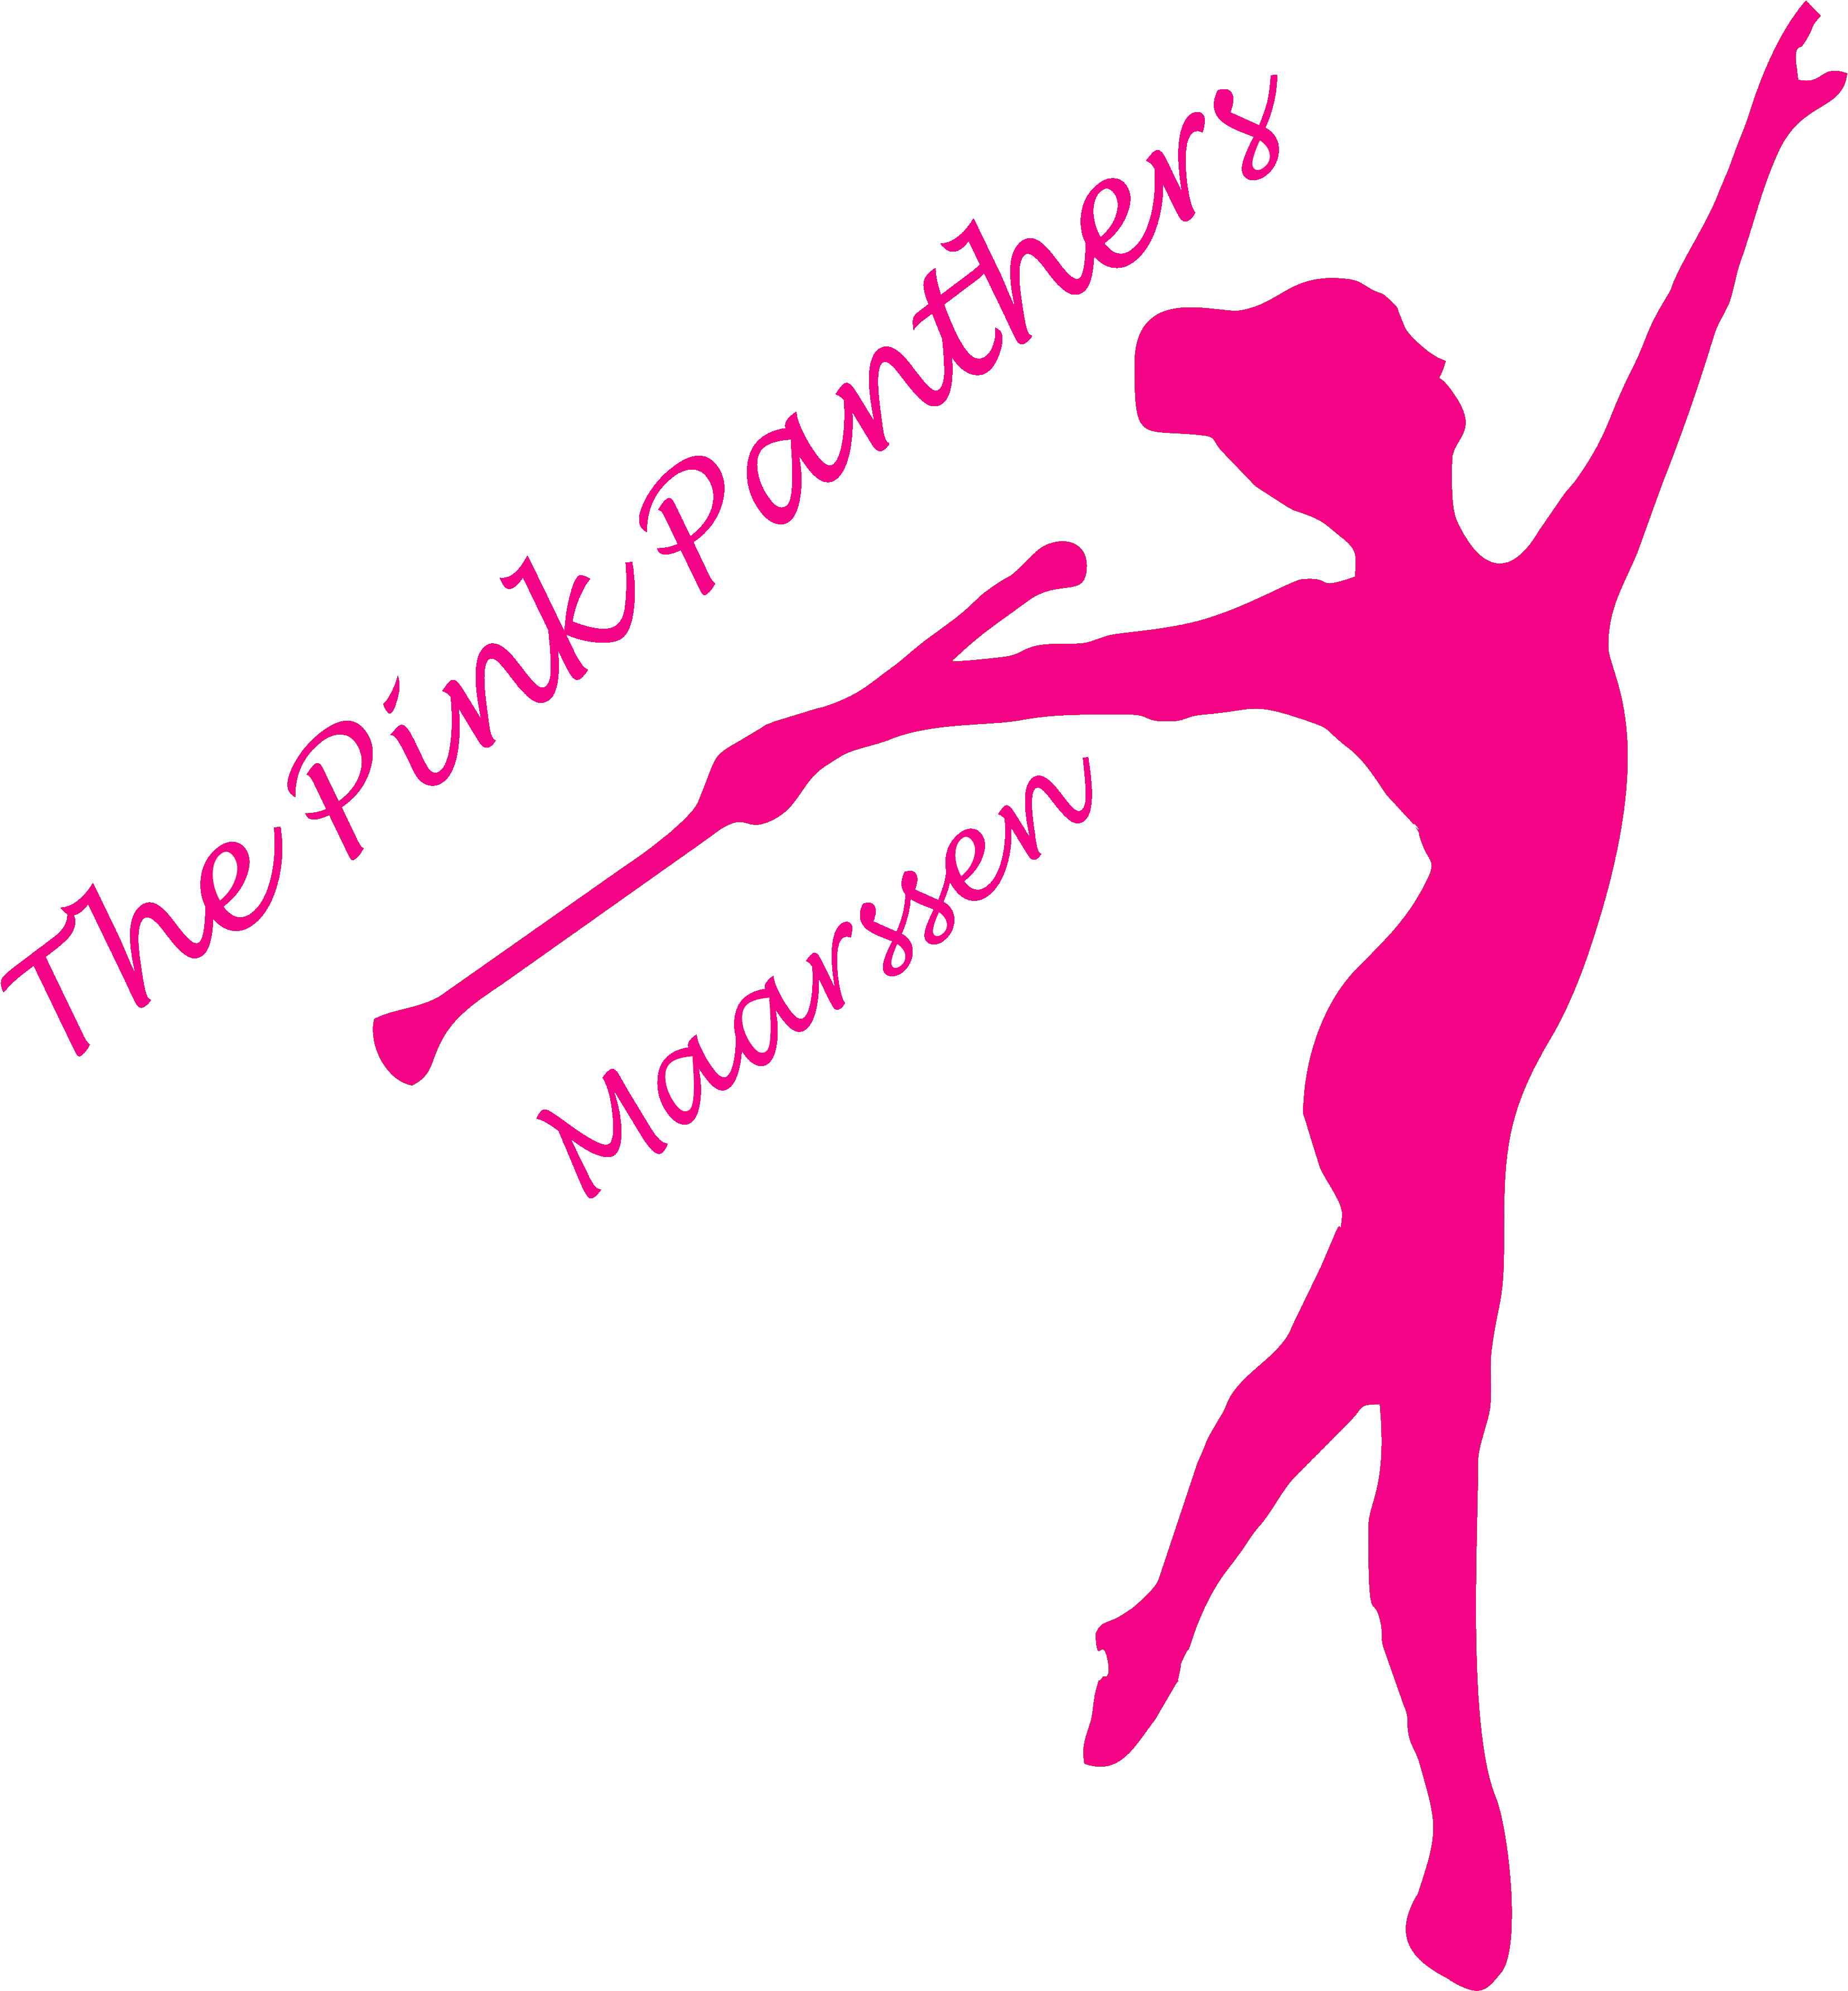 The Pink Panthers